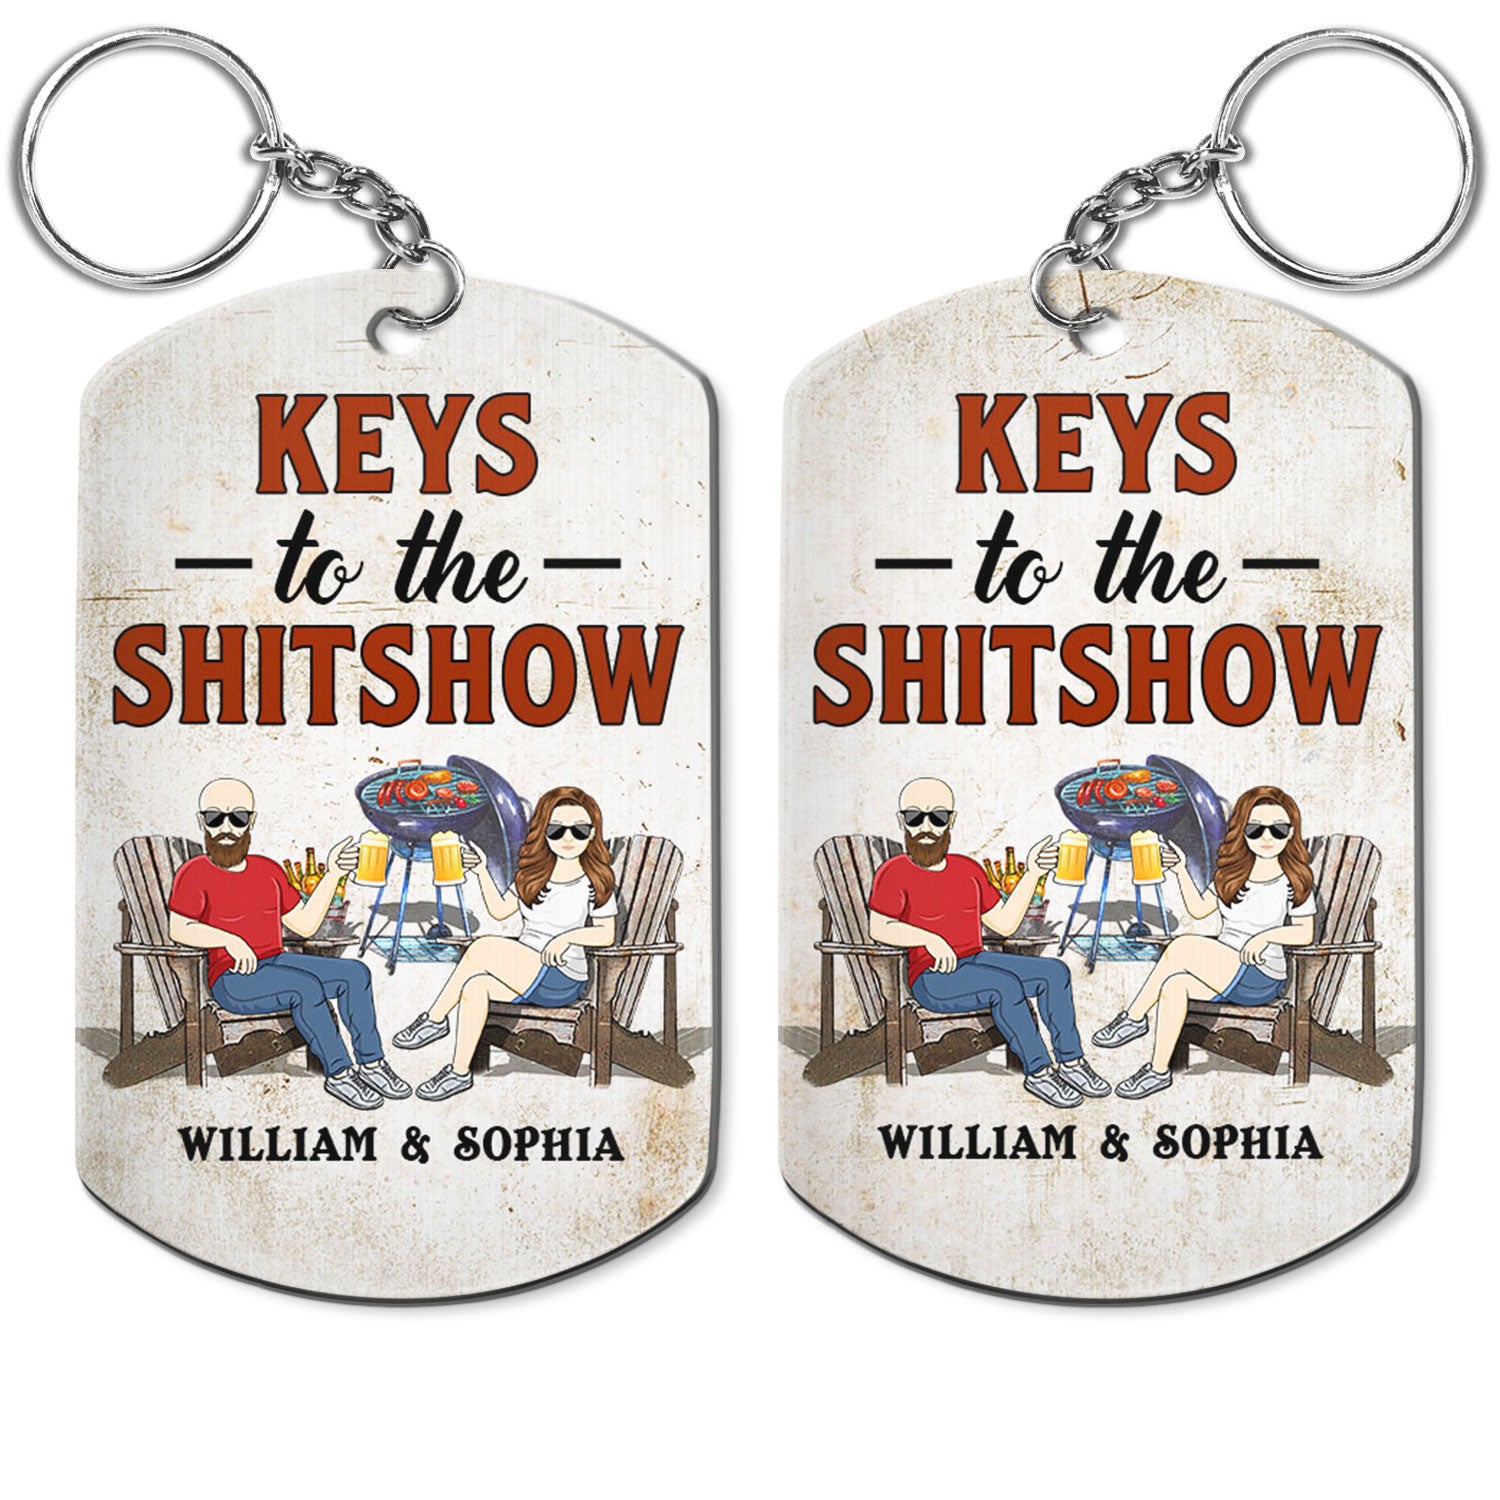 Keys To The Grilling - Funny, Birthday Gifts For Couples - Personalized Aluminum Keychain